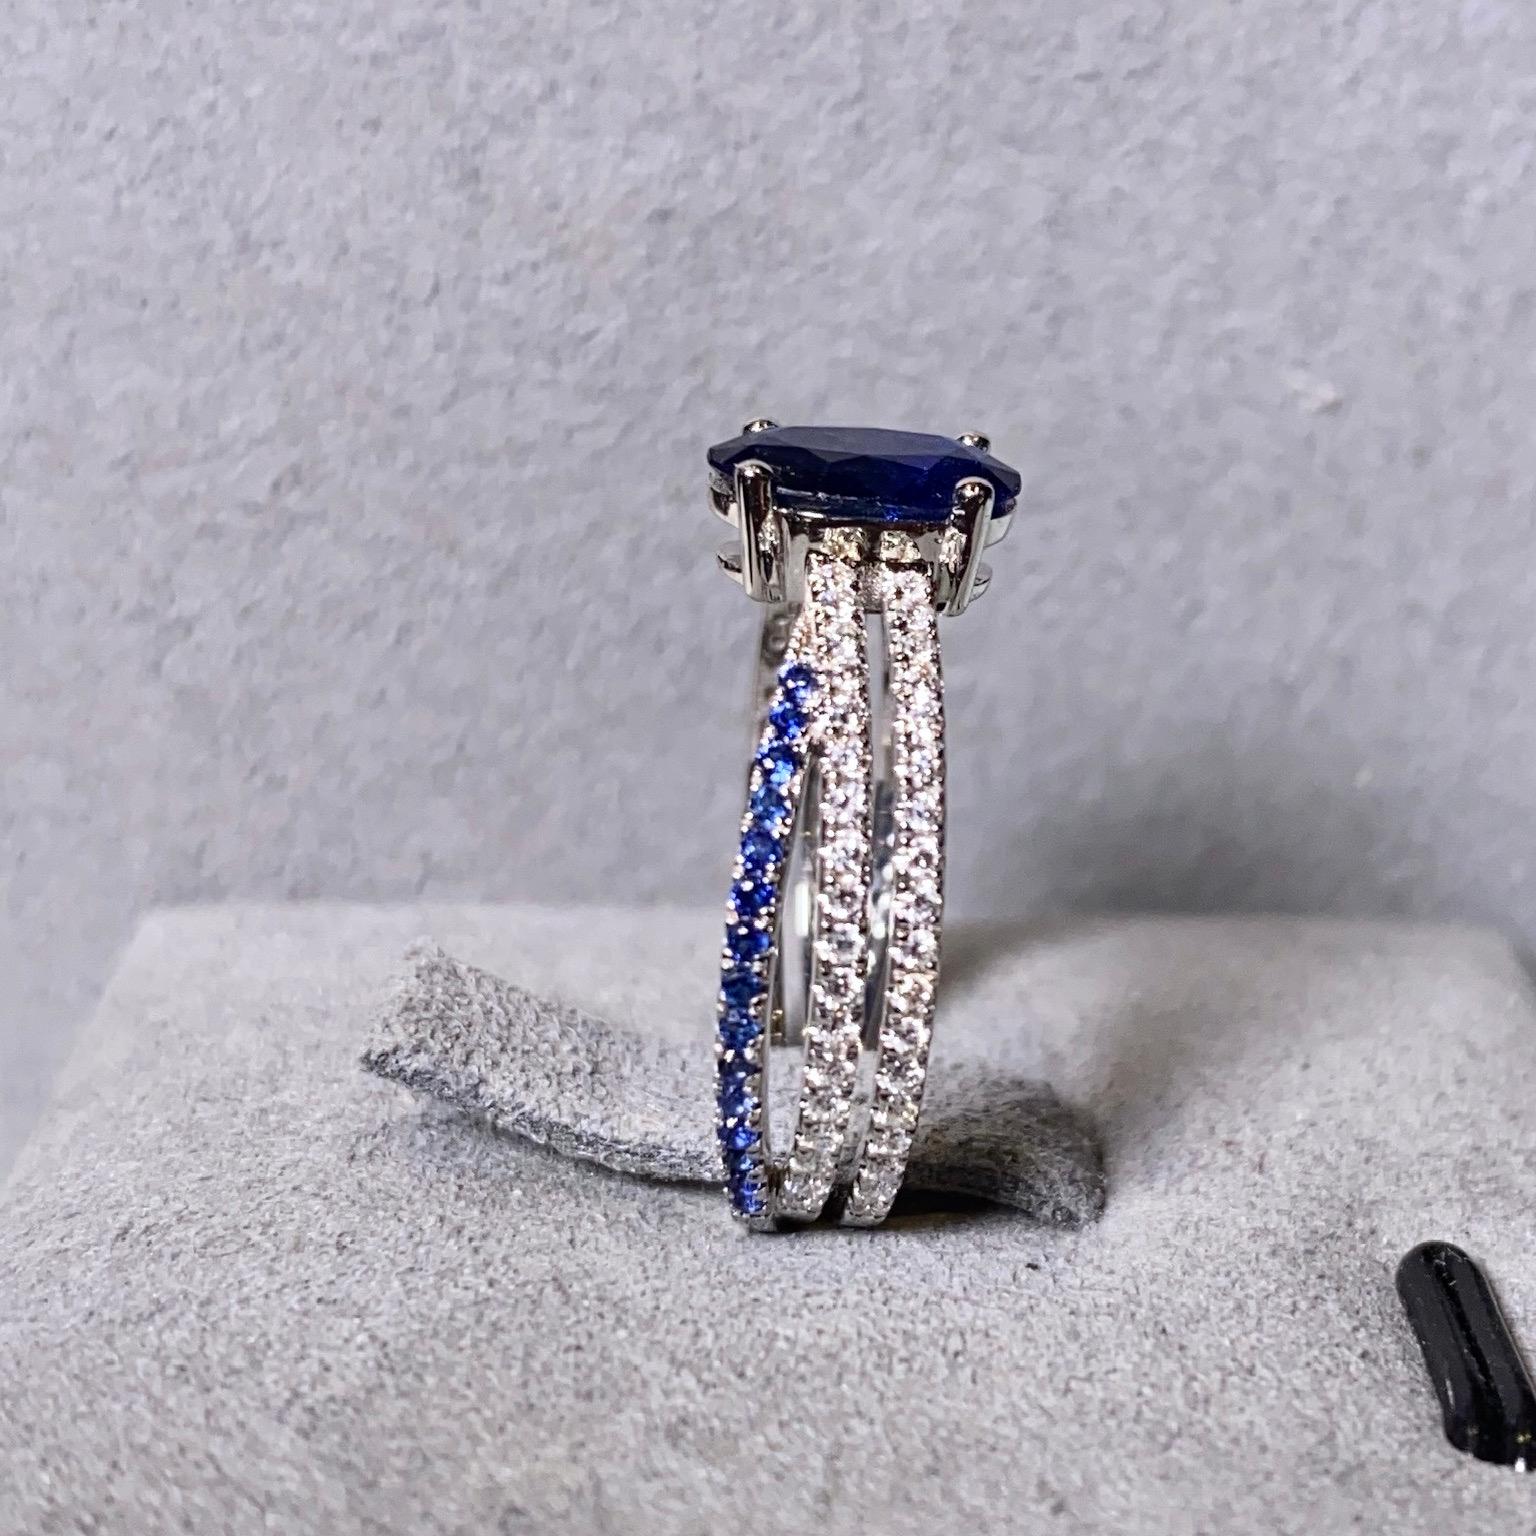 Blue Sapphire and Diamond Ring in 18k White Gold. The main sapphire is secured by 4 white gold claws and the band of the ring is made up of 3 individual pave bands. The 2 diamond pave bends are parallel to each other while the sapphire pave bend